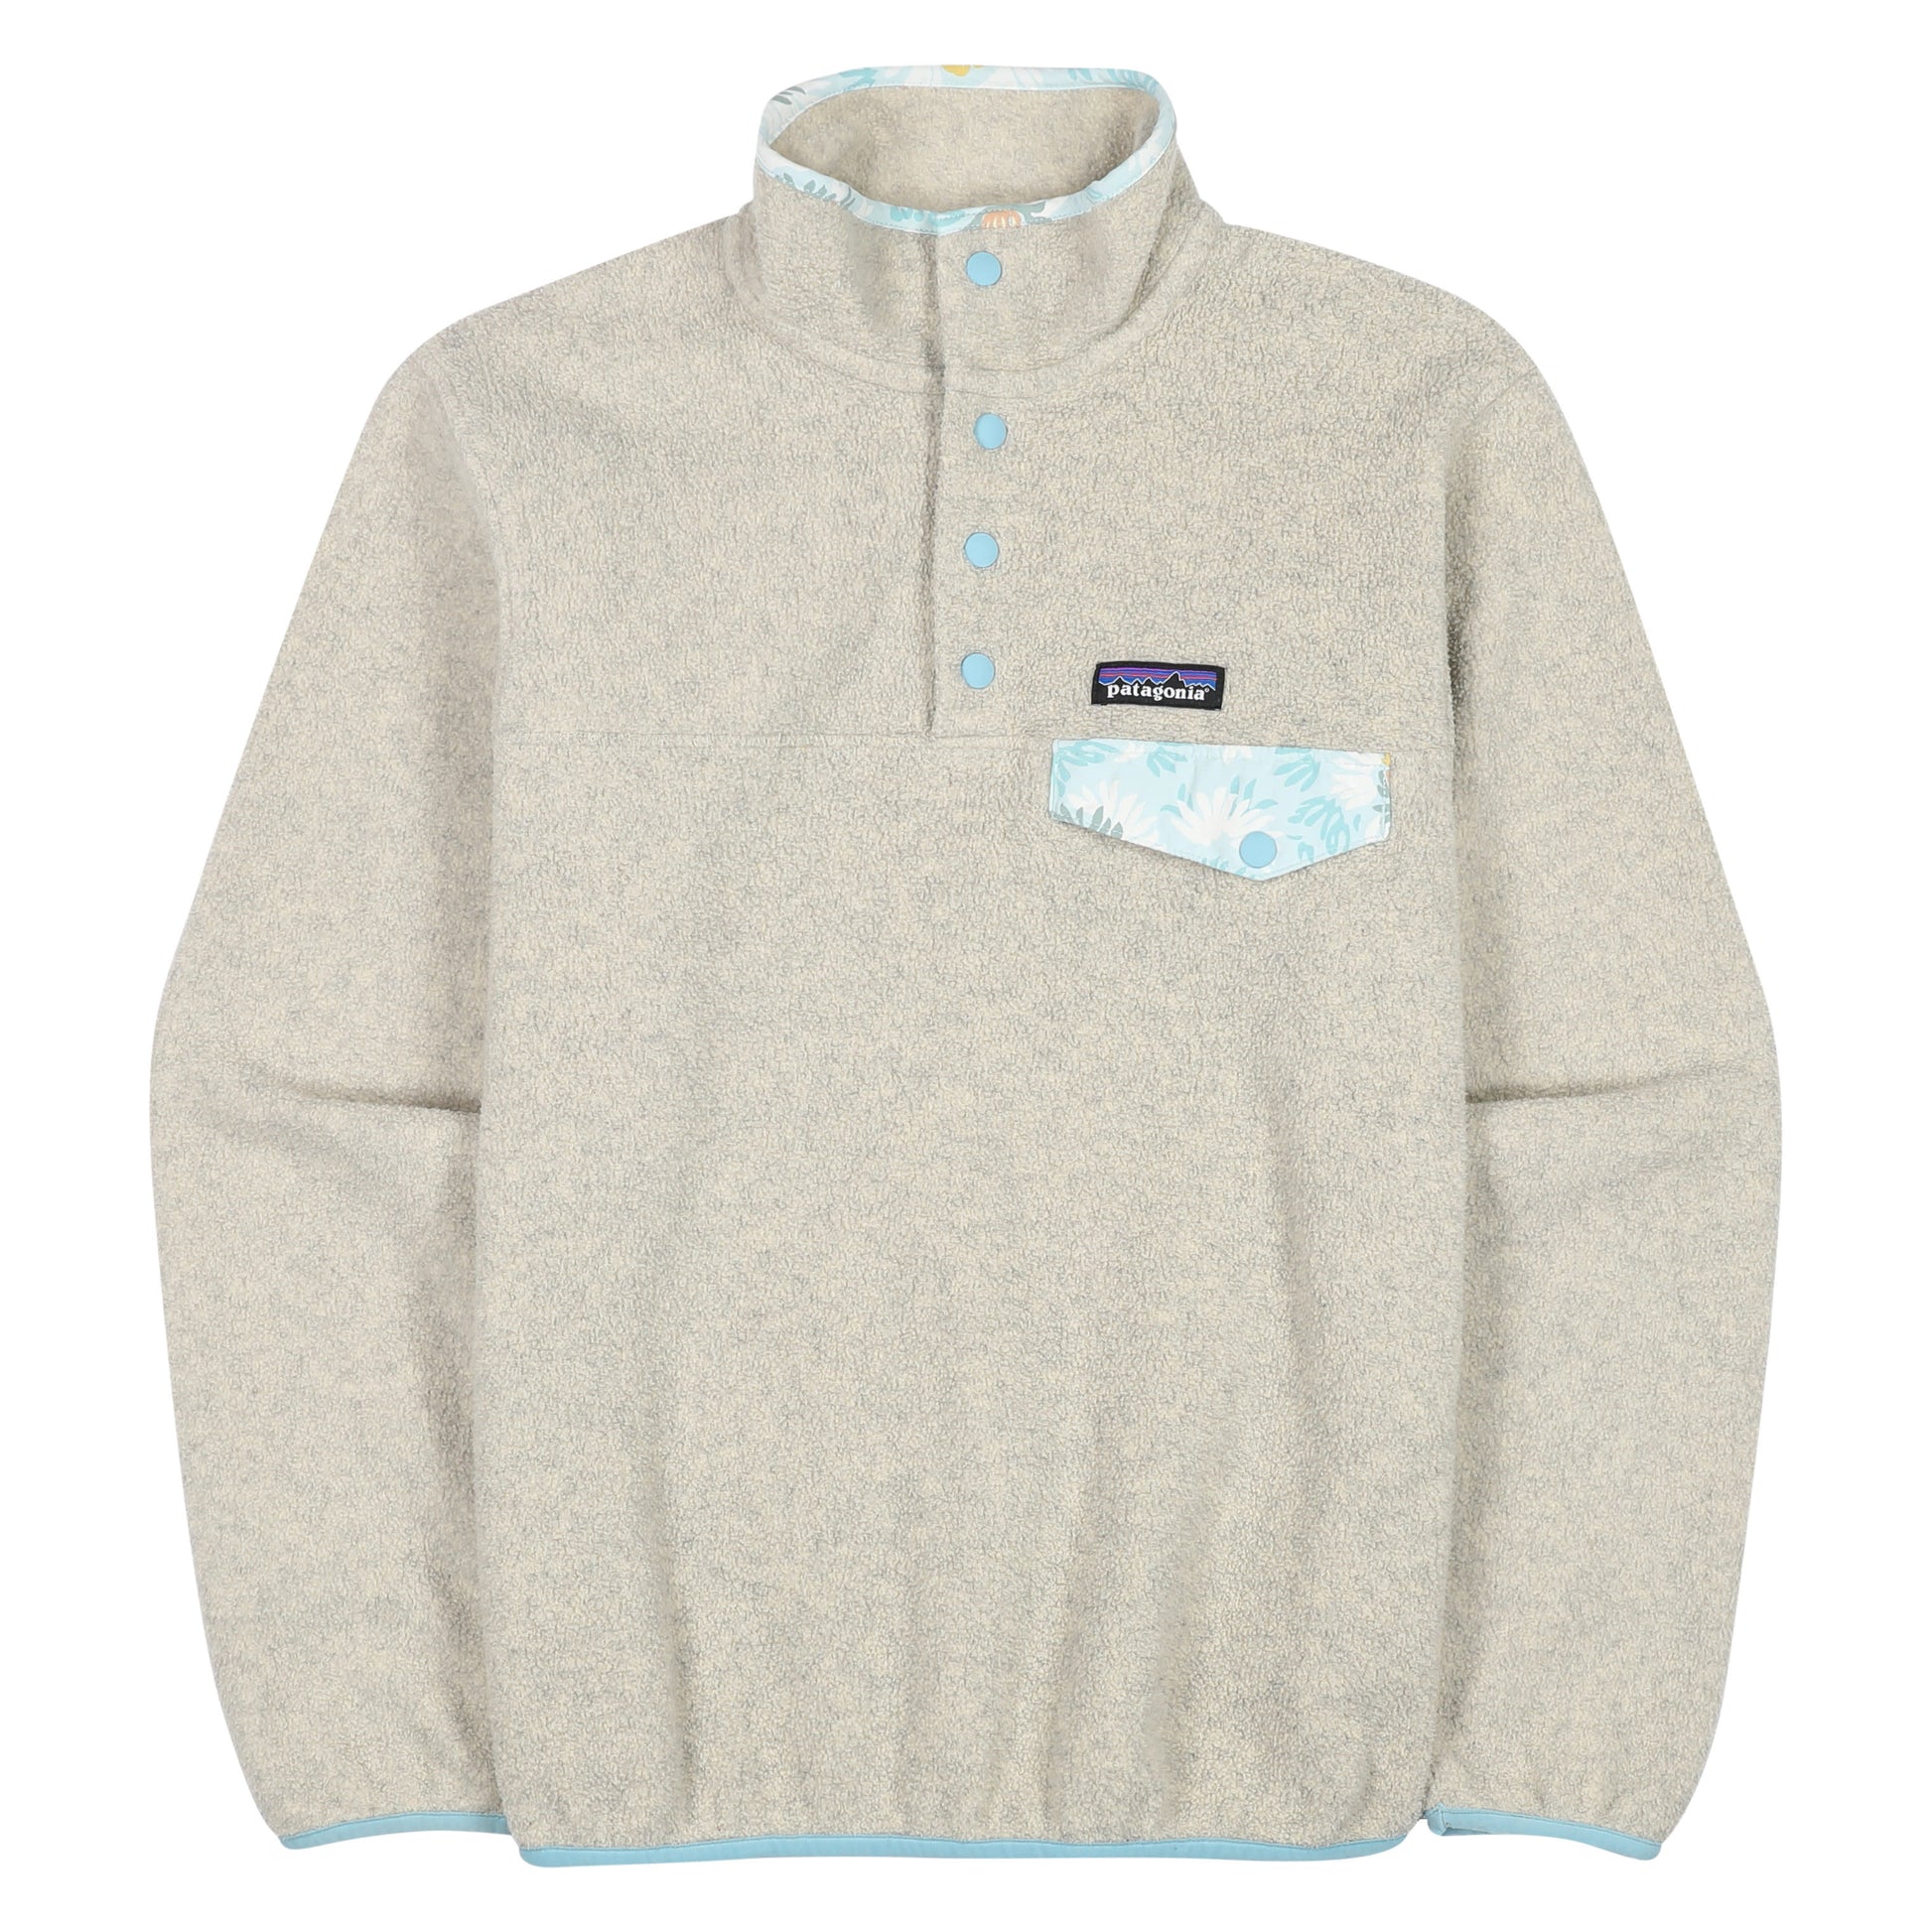 PATAGONIA - Vintage Synchilla - Fleece Pullover - Large - Grey M - Classic  - L 